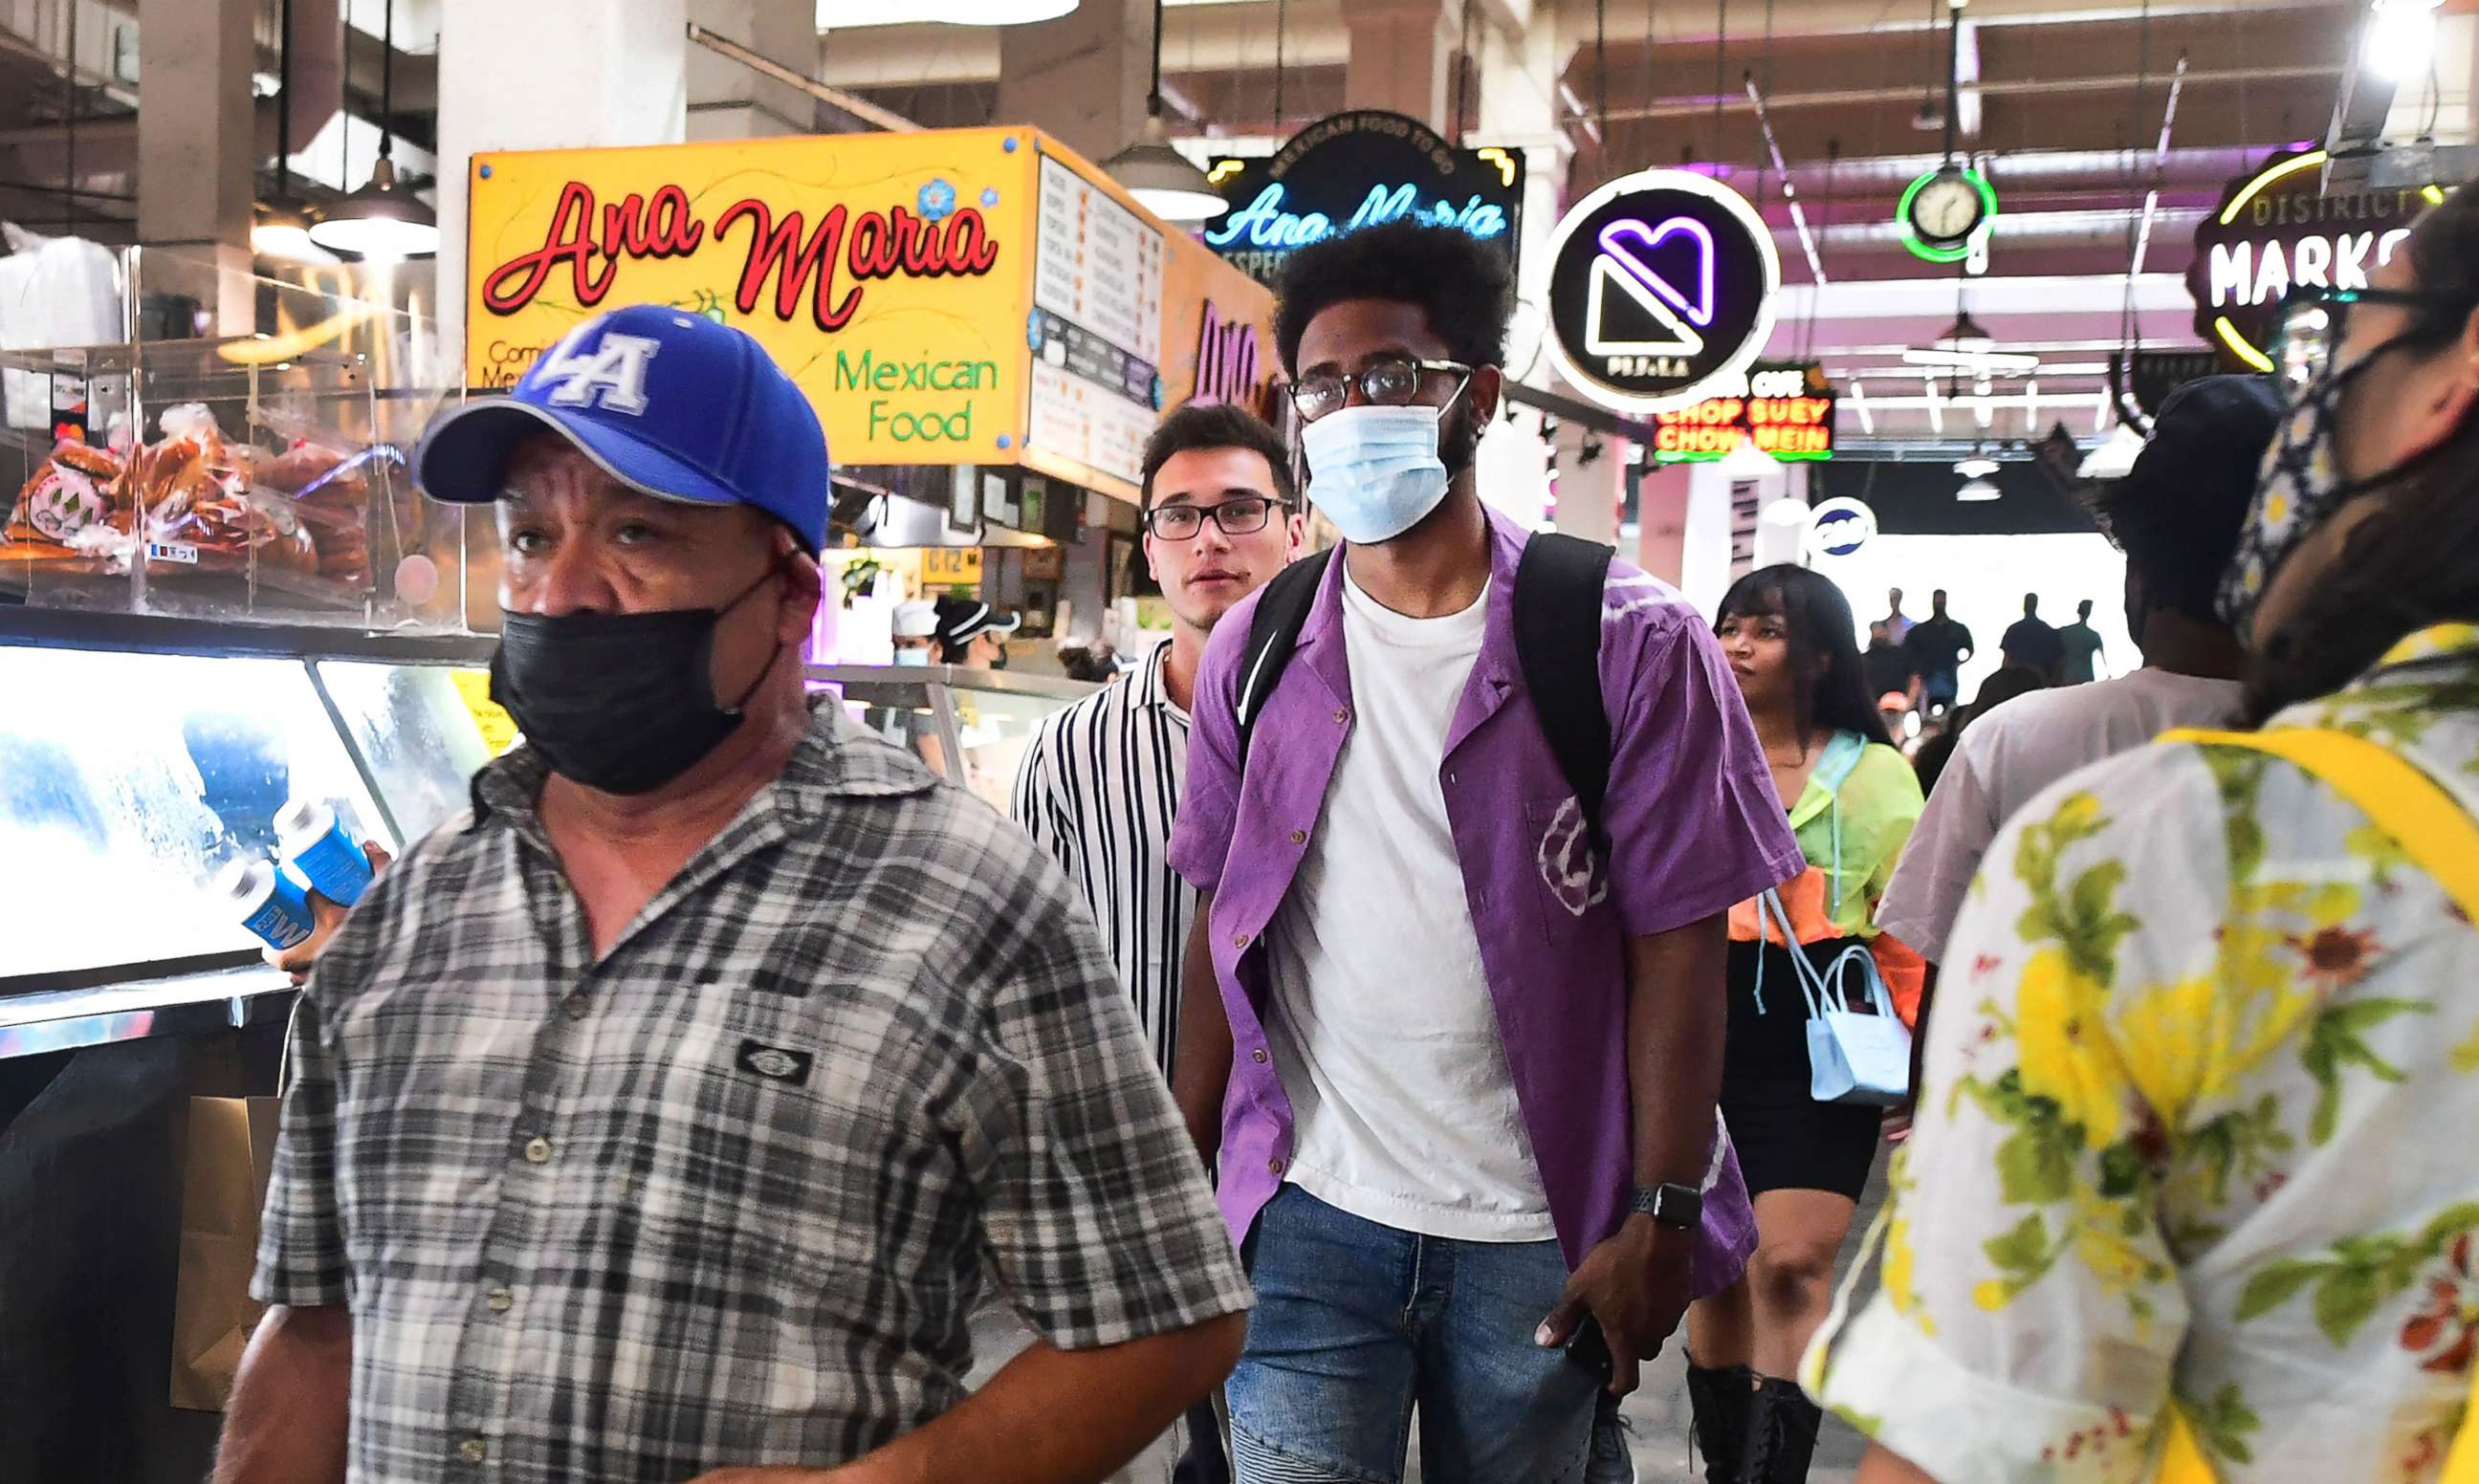 PHOTO: Masked and unmasked people make their way through Grand Central Market in Los Angeles, on June 29, 2021 as the WHO urges fully vaccinated people to continue wearing masks with the rapid spread of the delta variant.